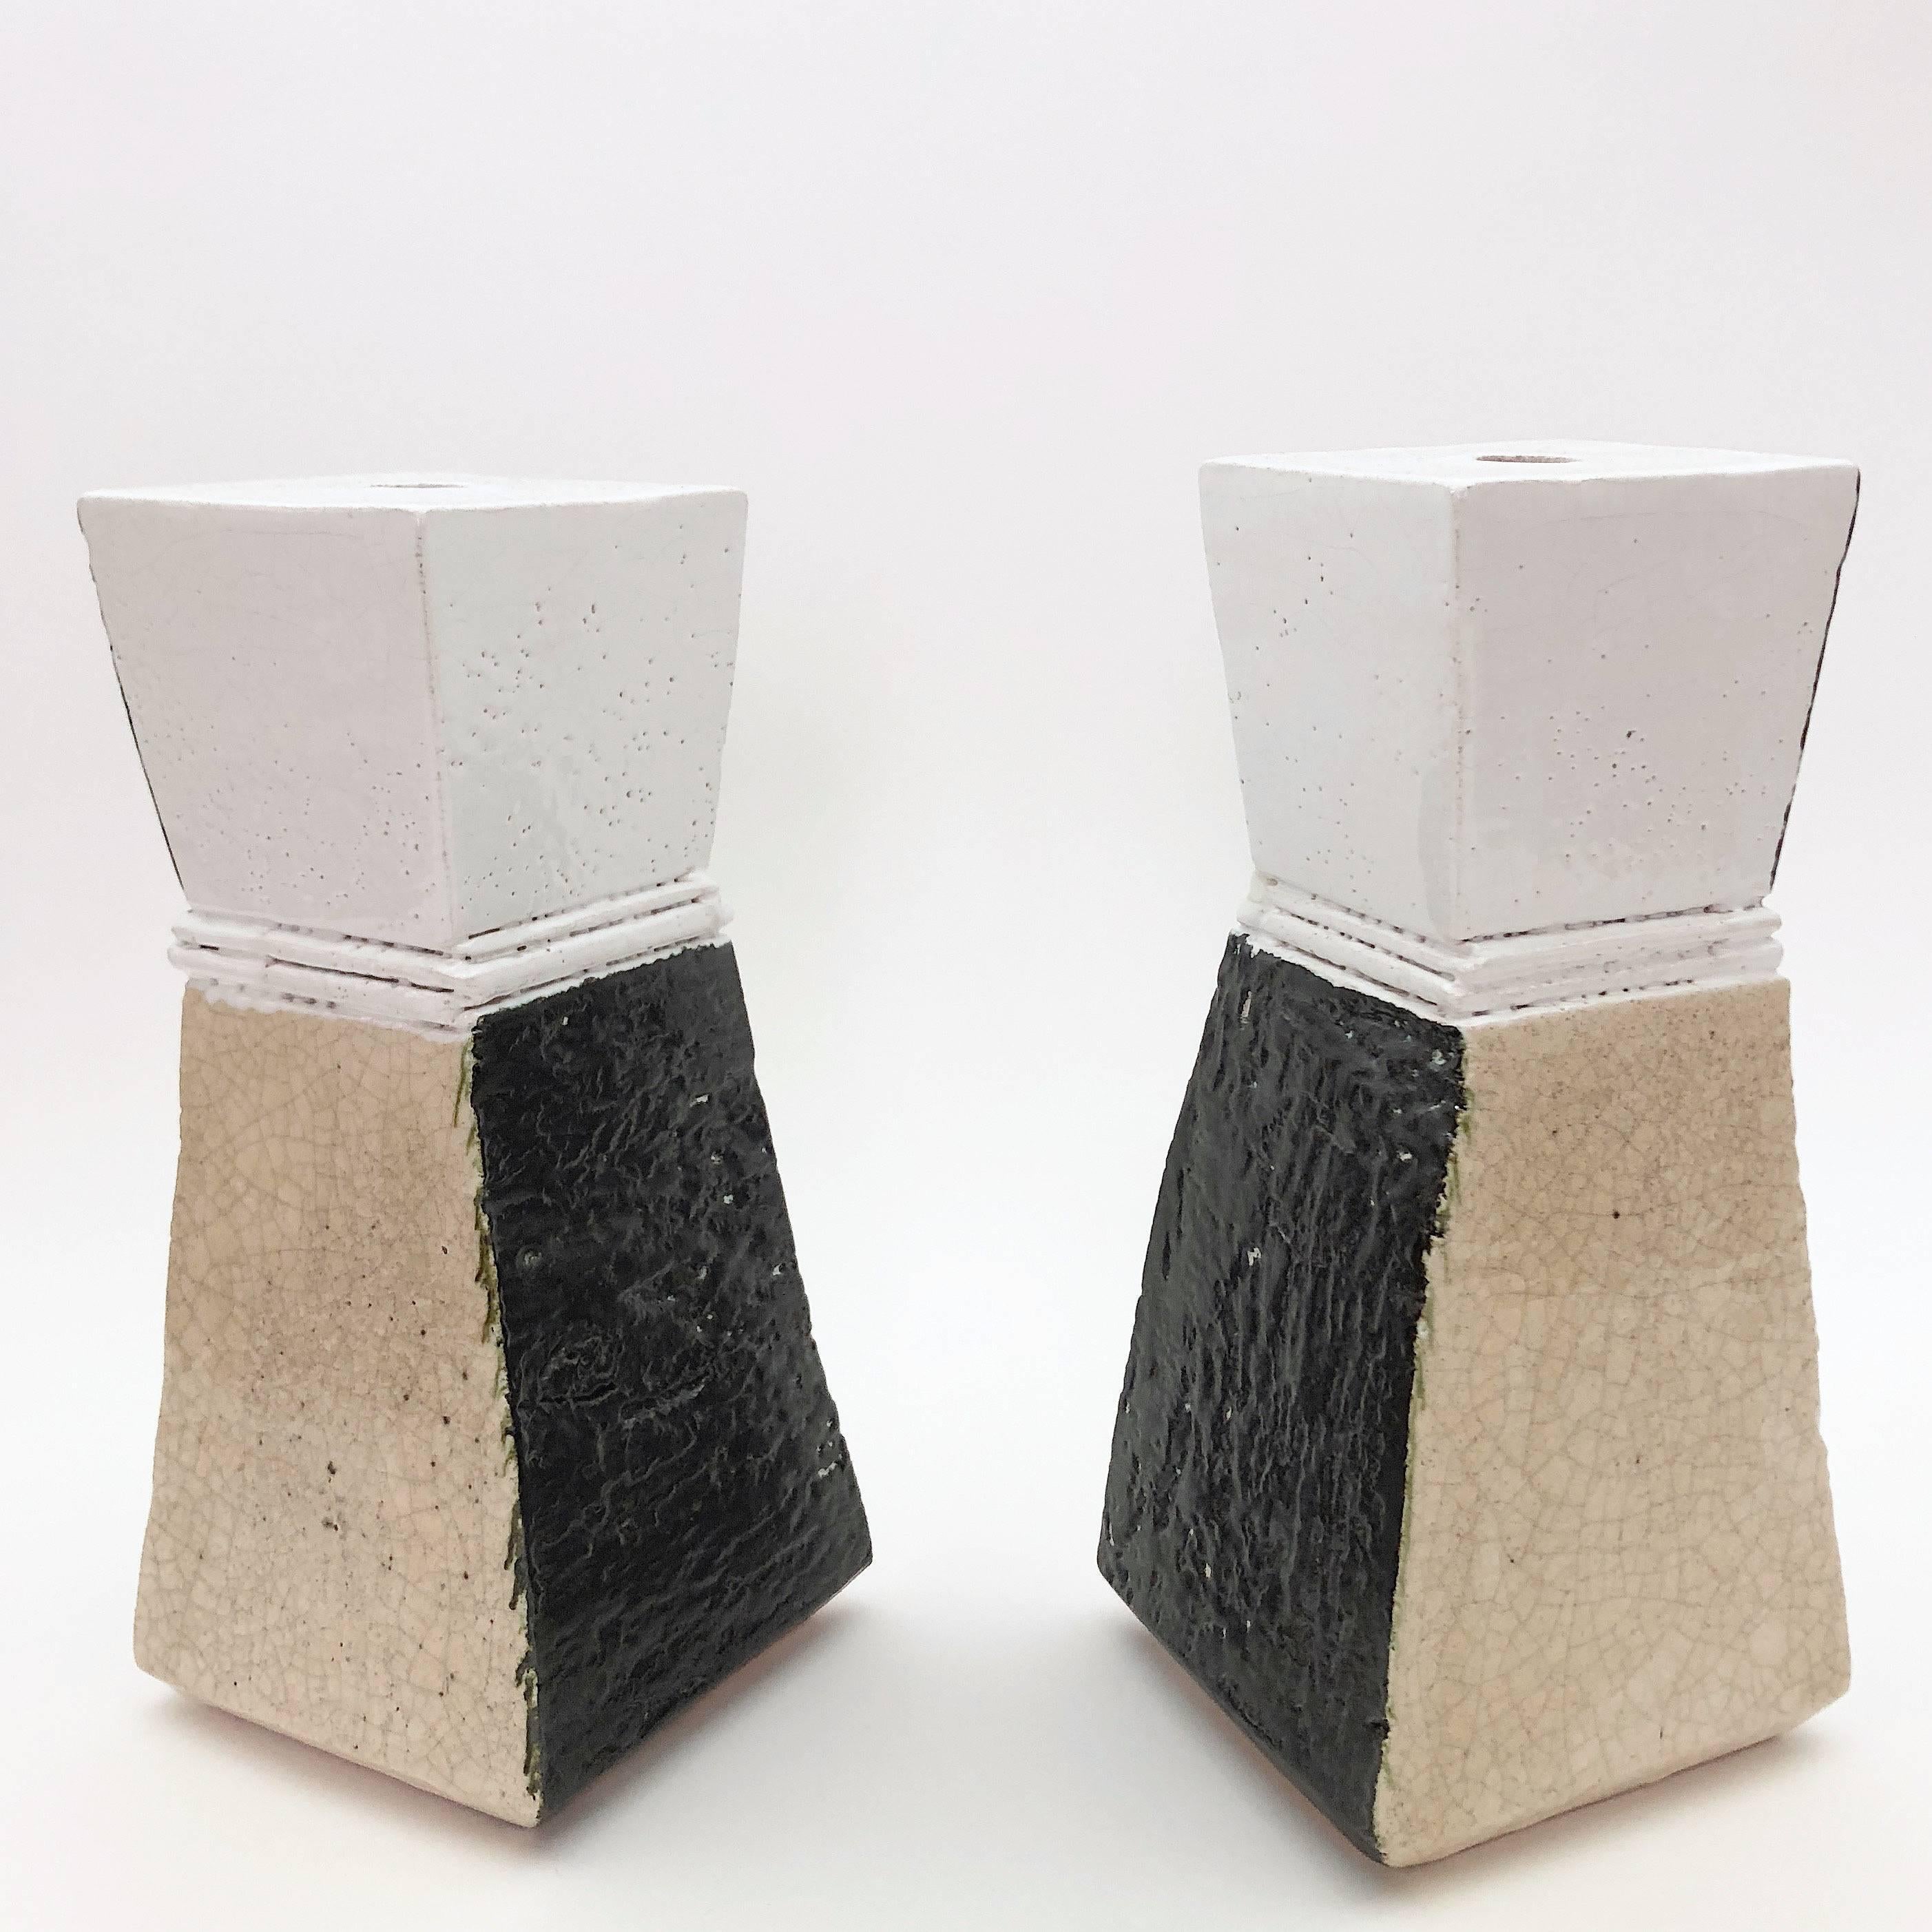 Pair of table lamp bases, geometric shaped, stoneware glazed in glossy pure white, cracked beige and dark brown.
One-of-a-kind hand-sculpted pieces, signed back with the artist's stamp.

Height dimensions are for the ceramic sculpture only and so